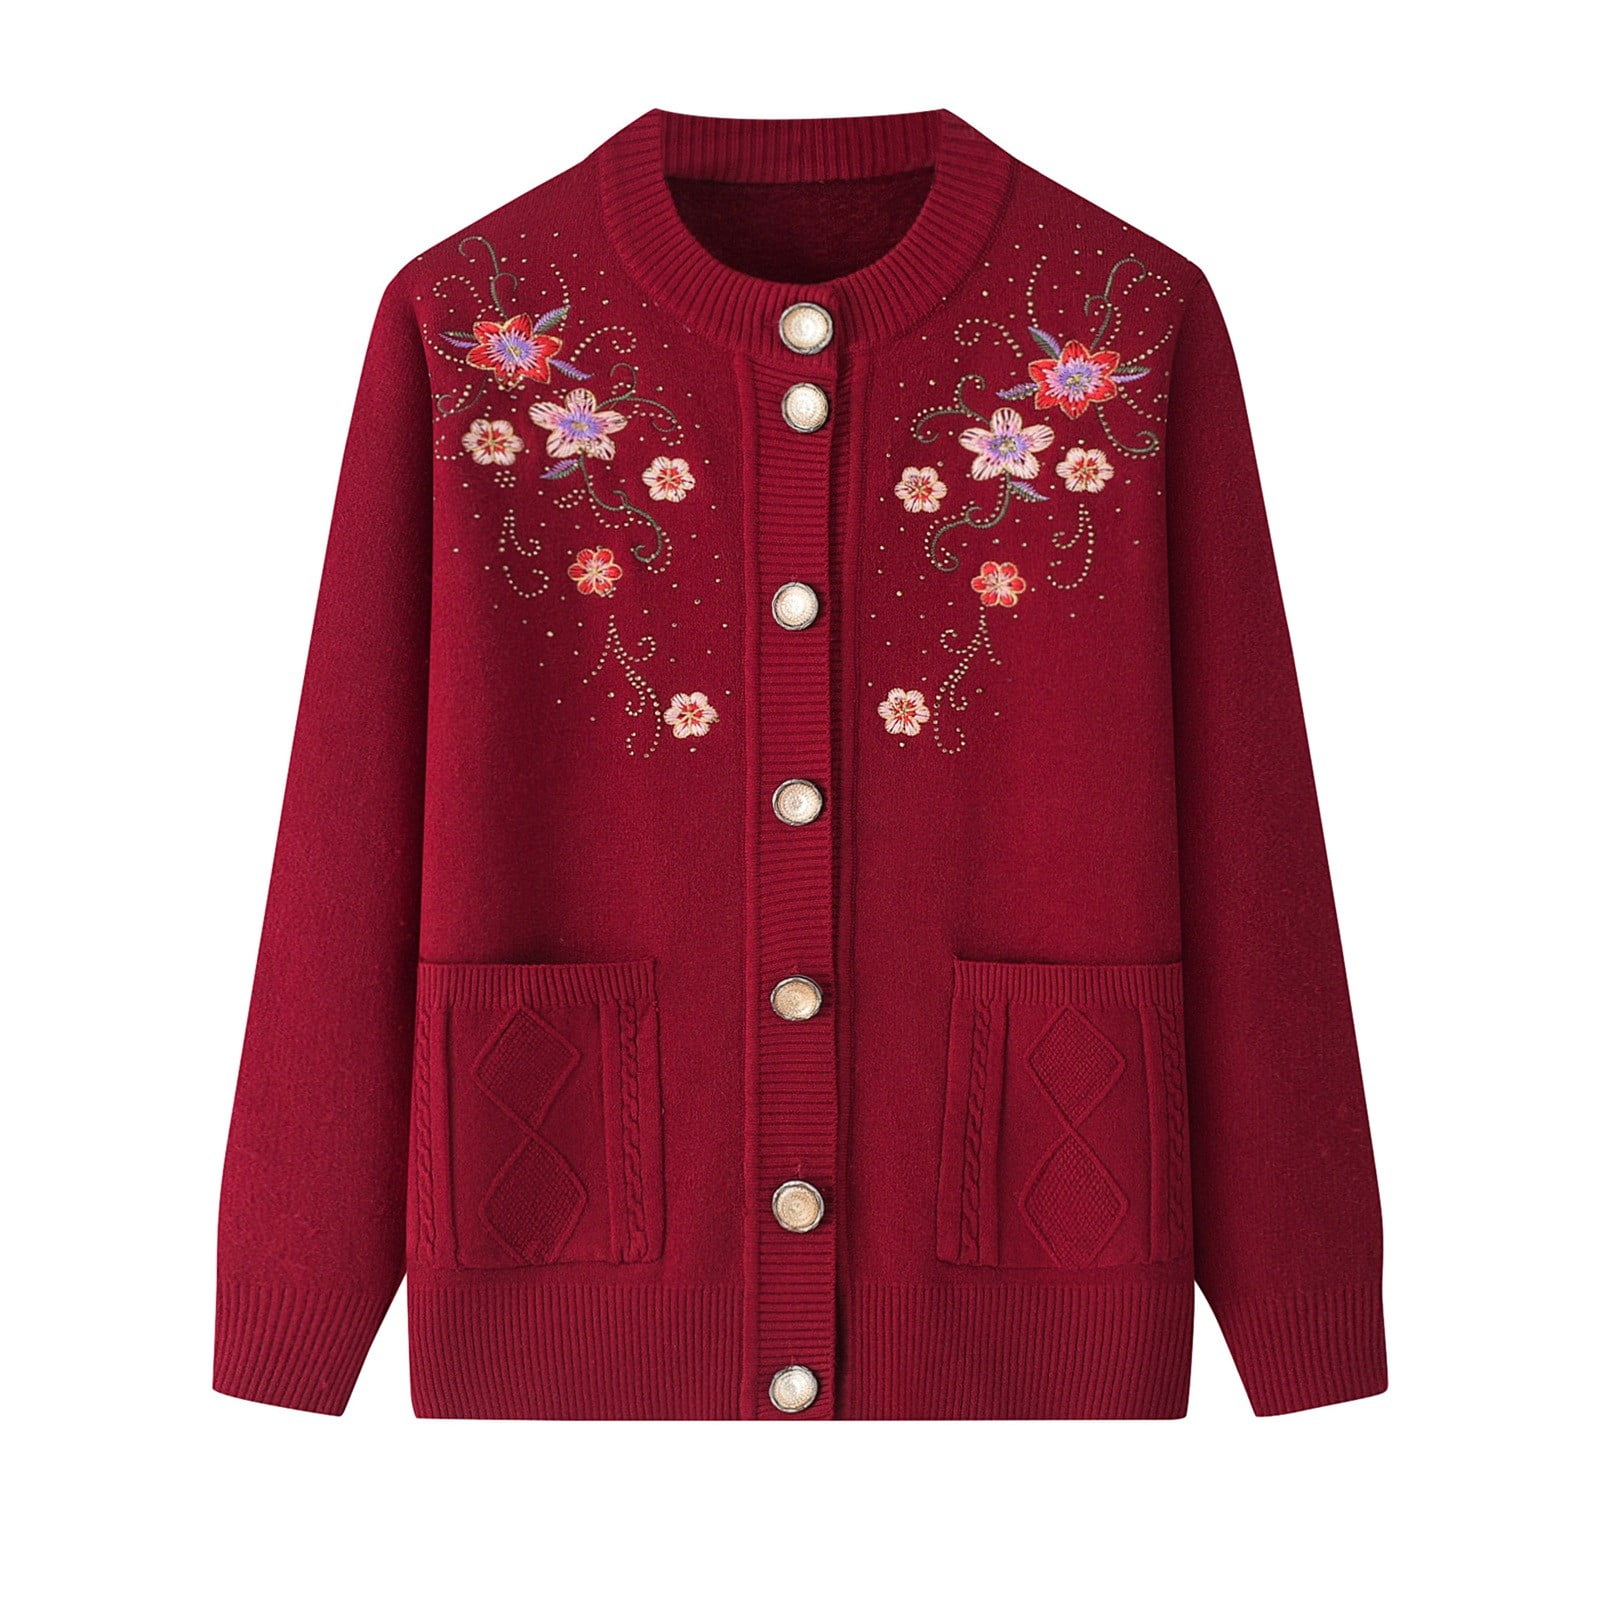 Women's Cardigan Embroidered Hook Pattern Rhinestone Knitted Plus ...